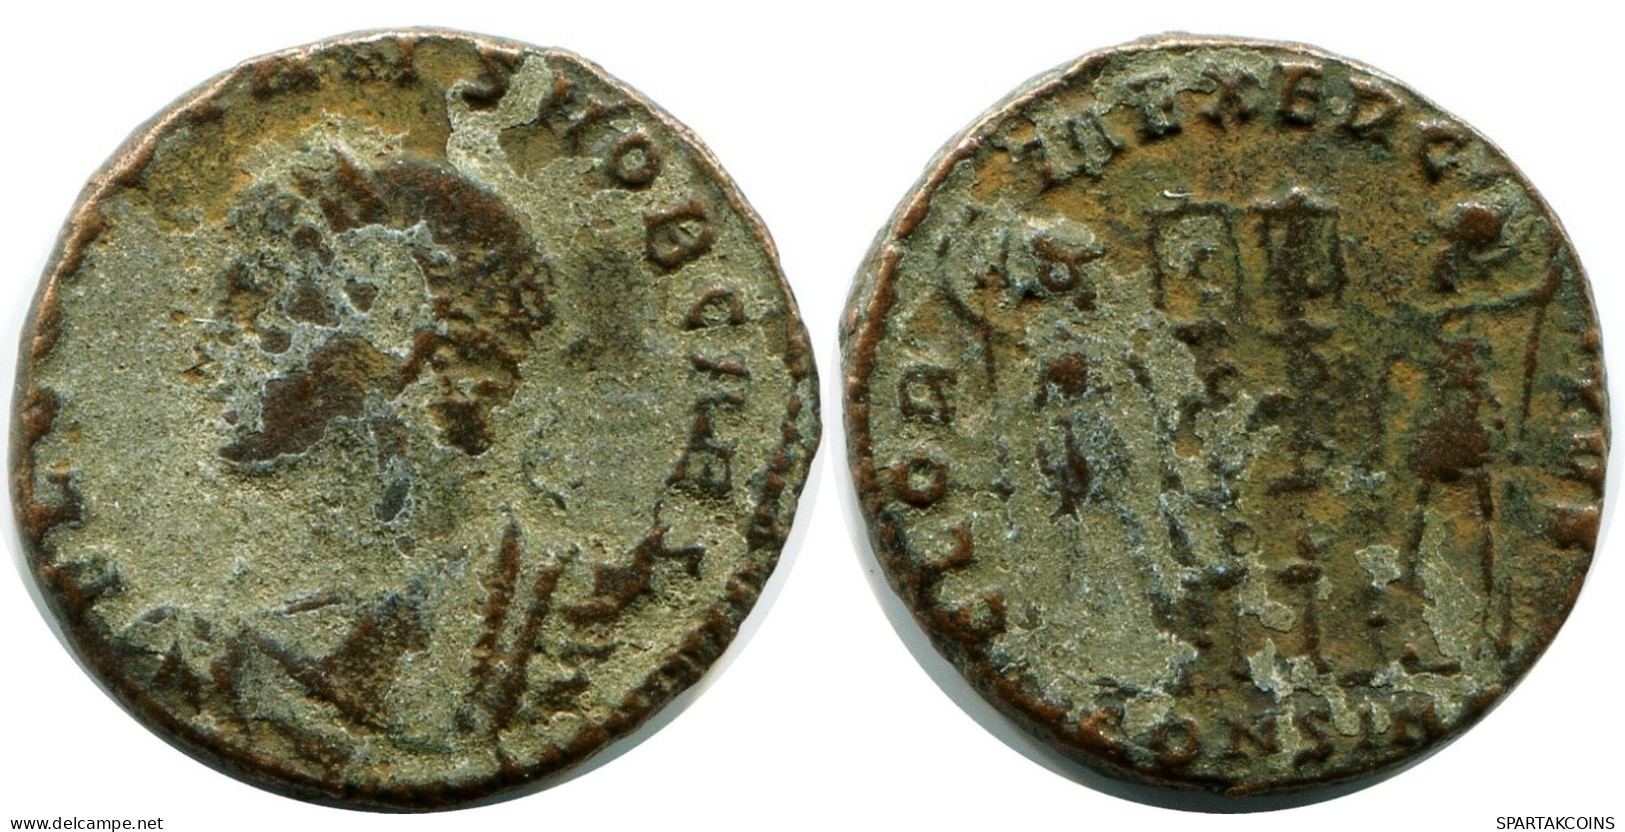 CONSTANS MINTED IN CONSTANTINOPLE FROM THE ROYAL ONTARIO MUSEUM #ANC11948.14.F.A - El Imperio Christiano (307 / 363)